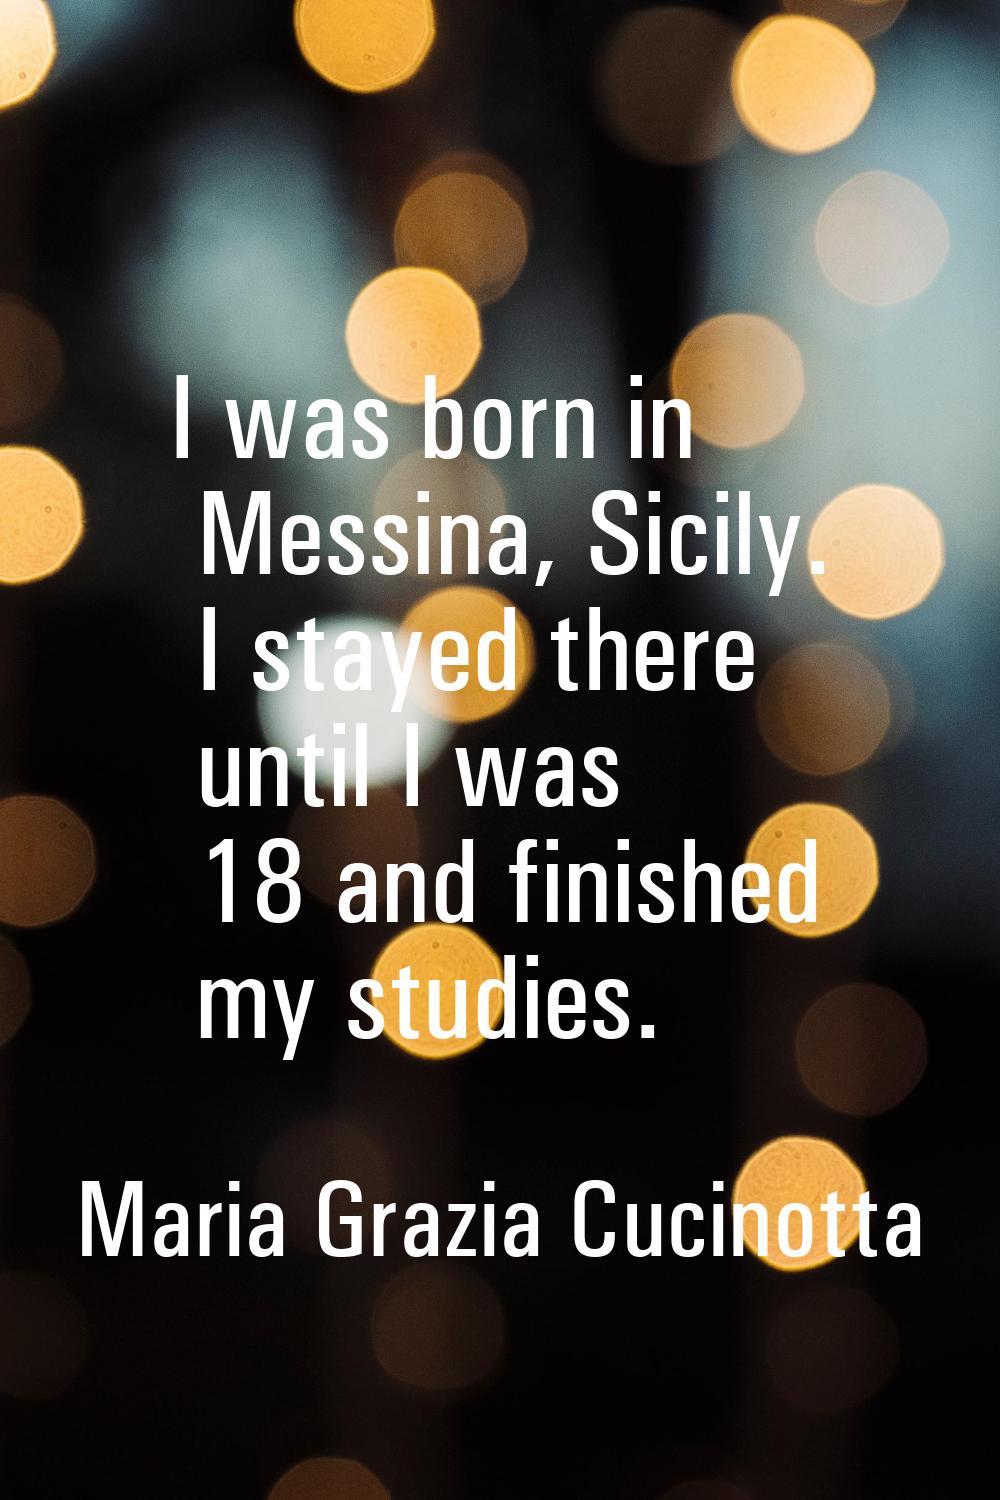 I was born in Messina, Sicily. I stayed there until I was 18 and finished my studies.